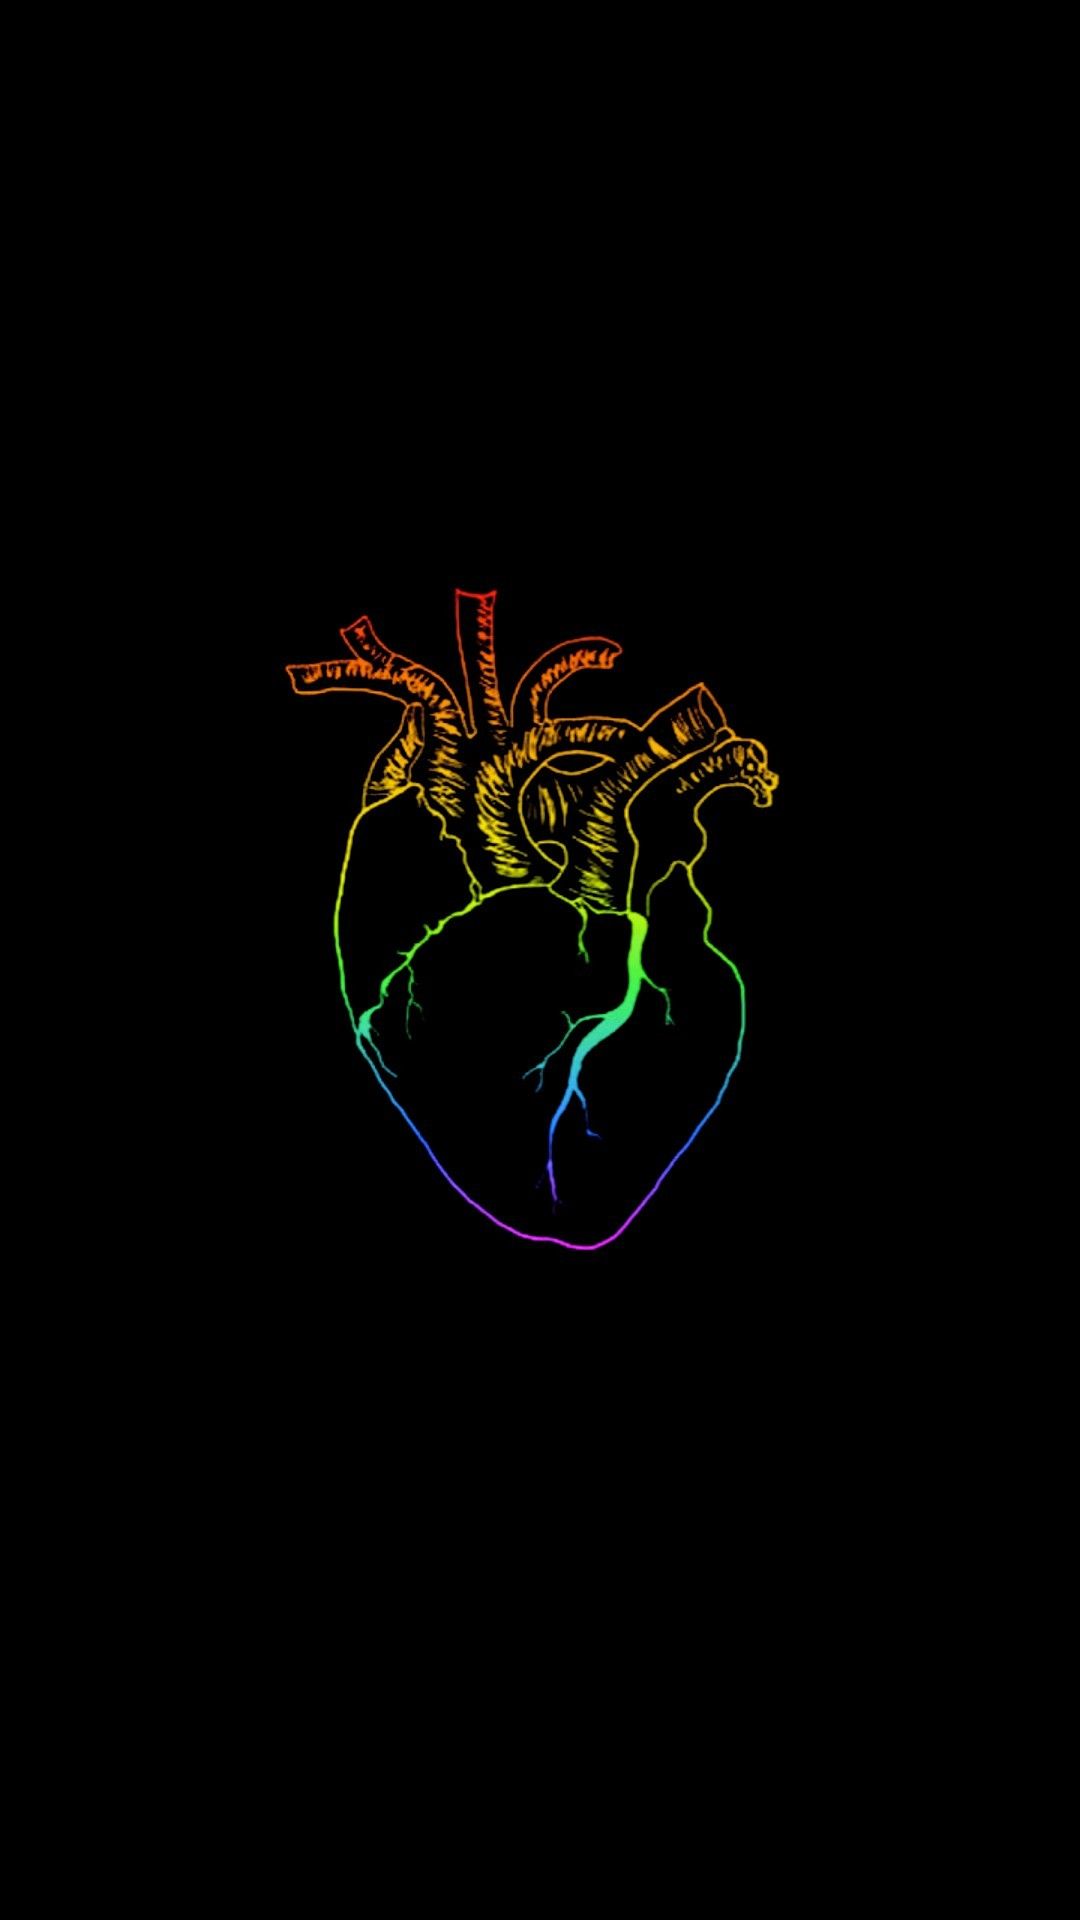 IPhone wallpaper of a neon rainbow heart on a black background - Pansexual